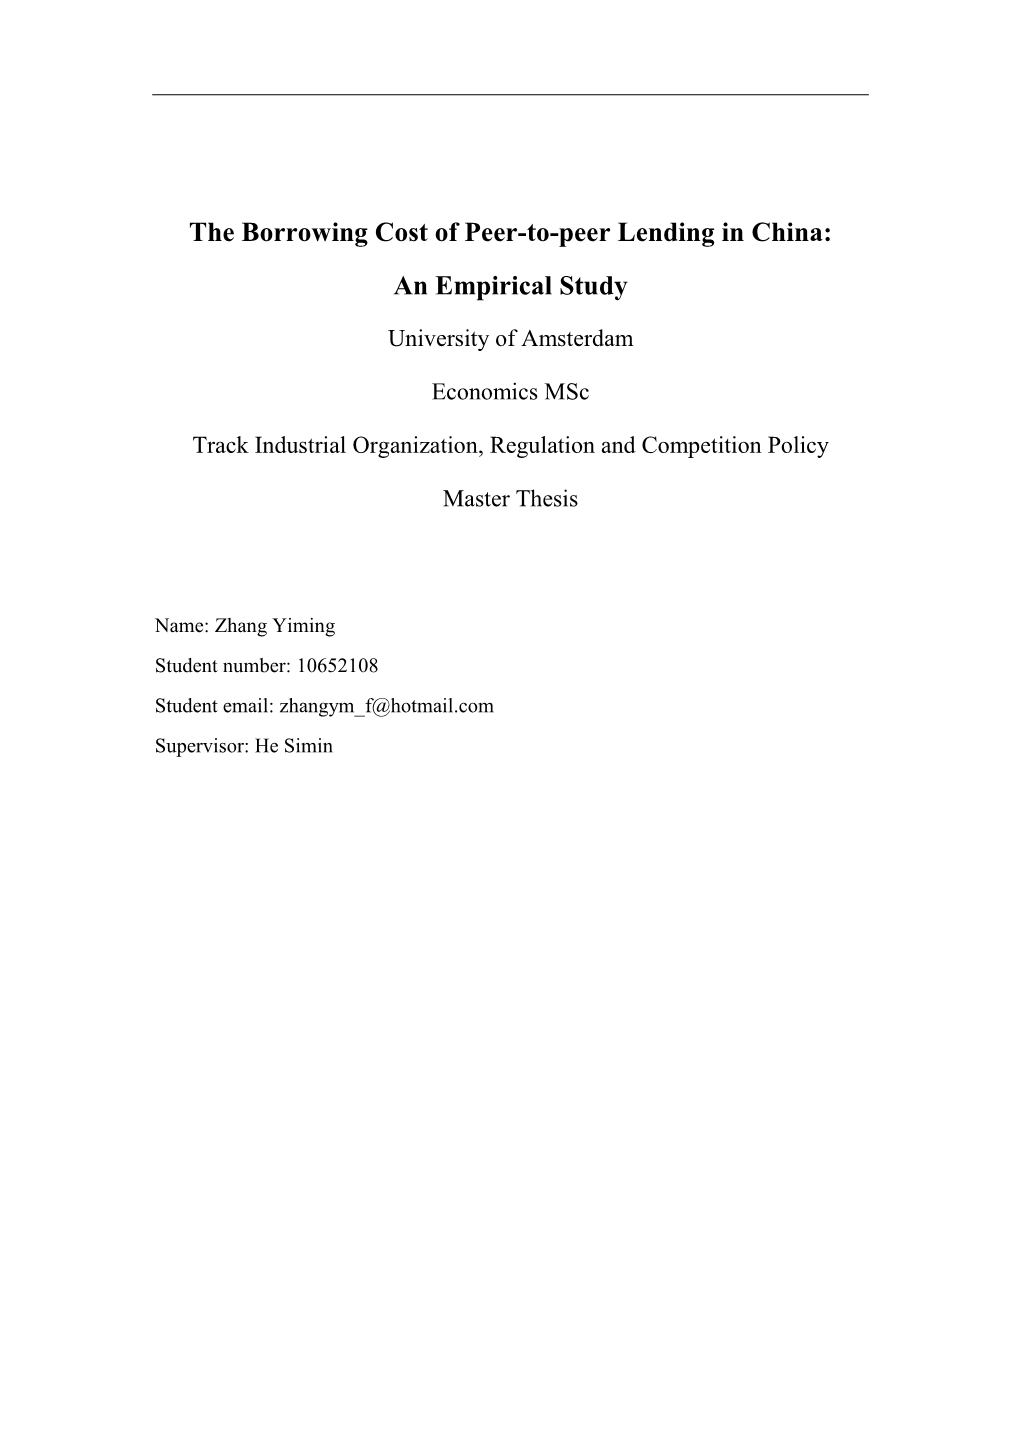 The Borrowing Cost of Peer-To-Peer Lending in China: an Empirical Study